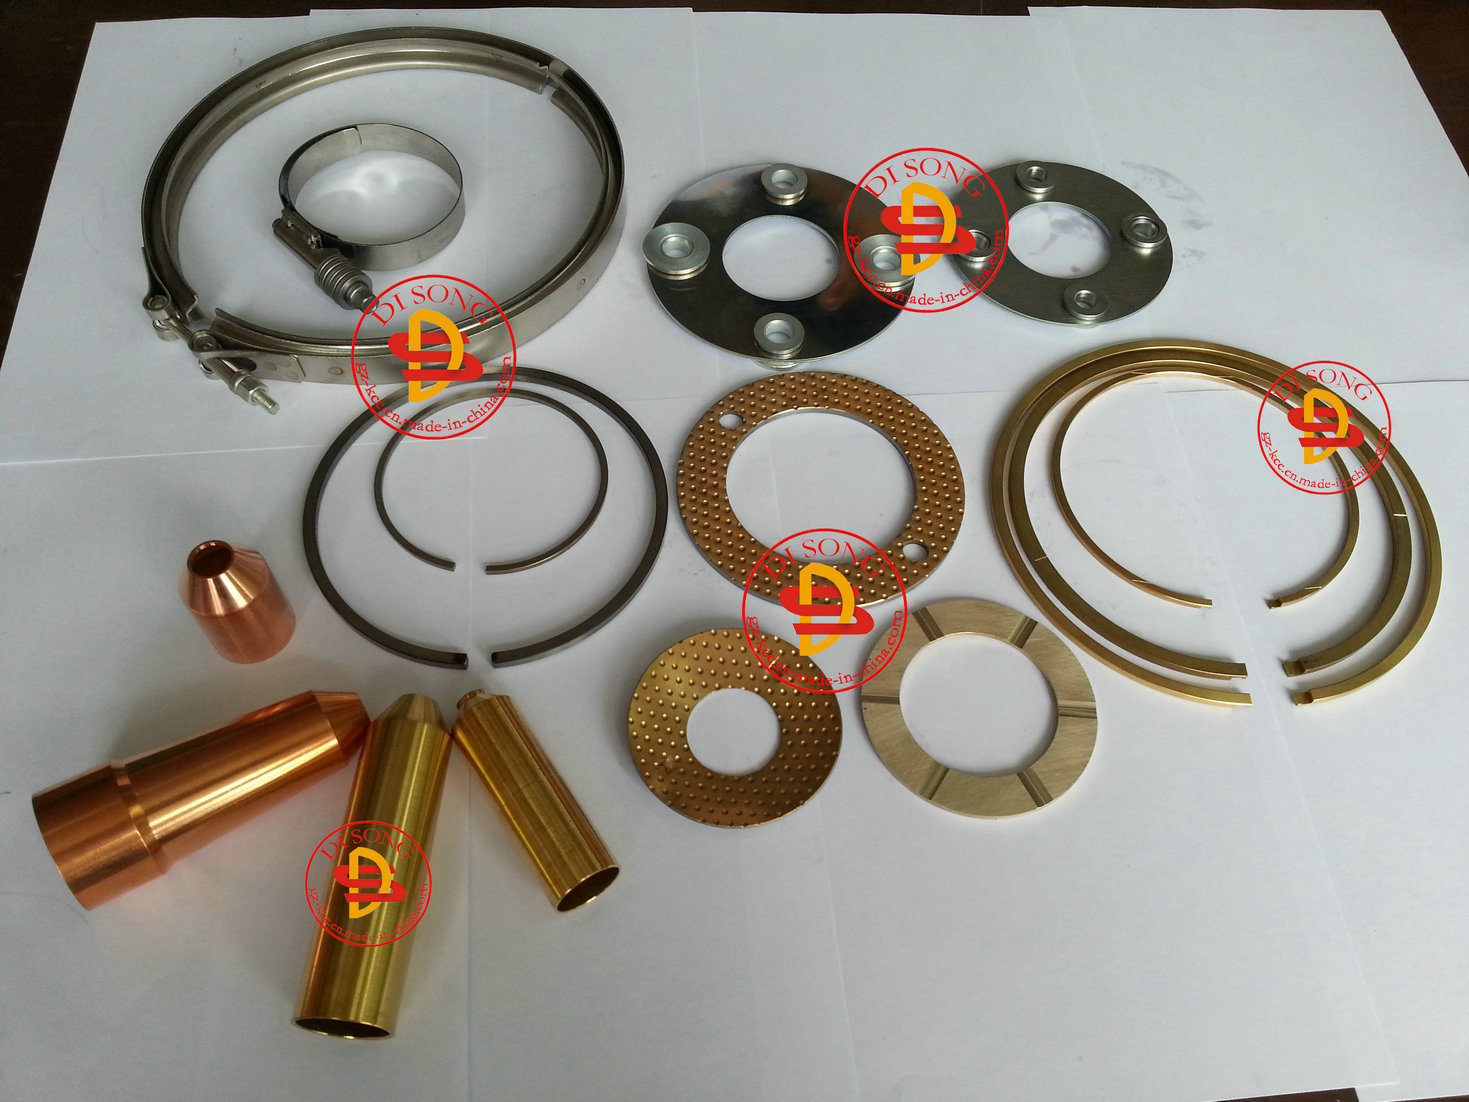 Construction Machinery Spare Parts with Clamp, Sleeve, Ring (NH220, S6D155)